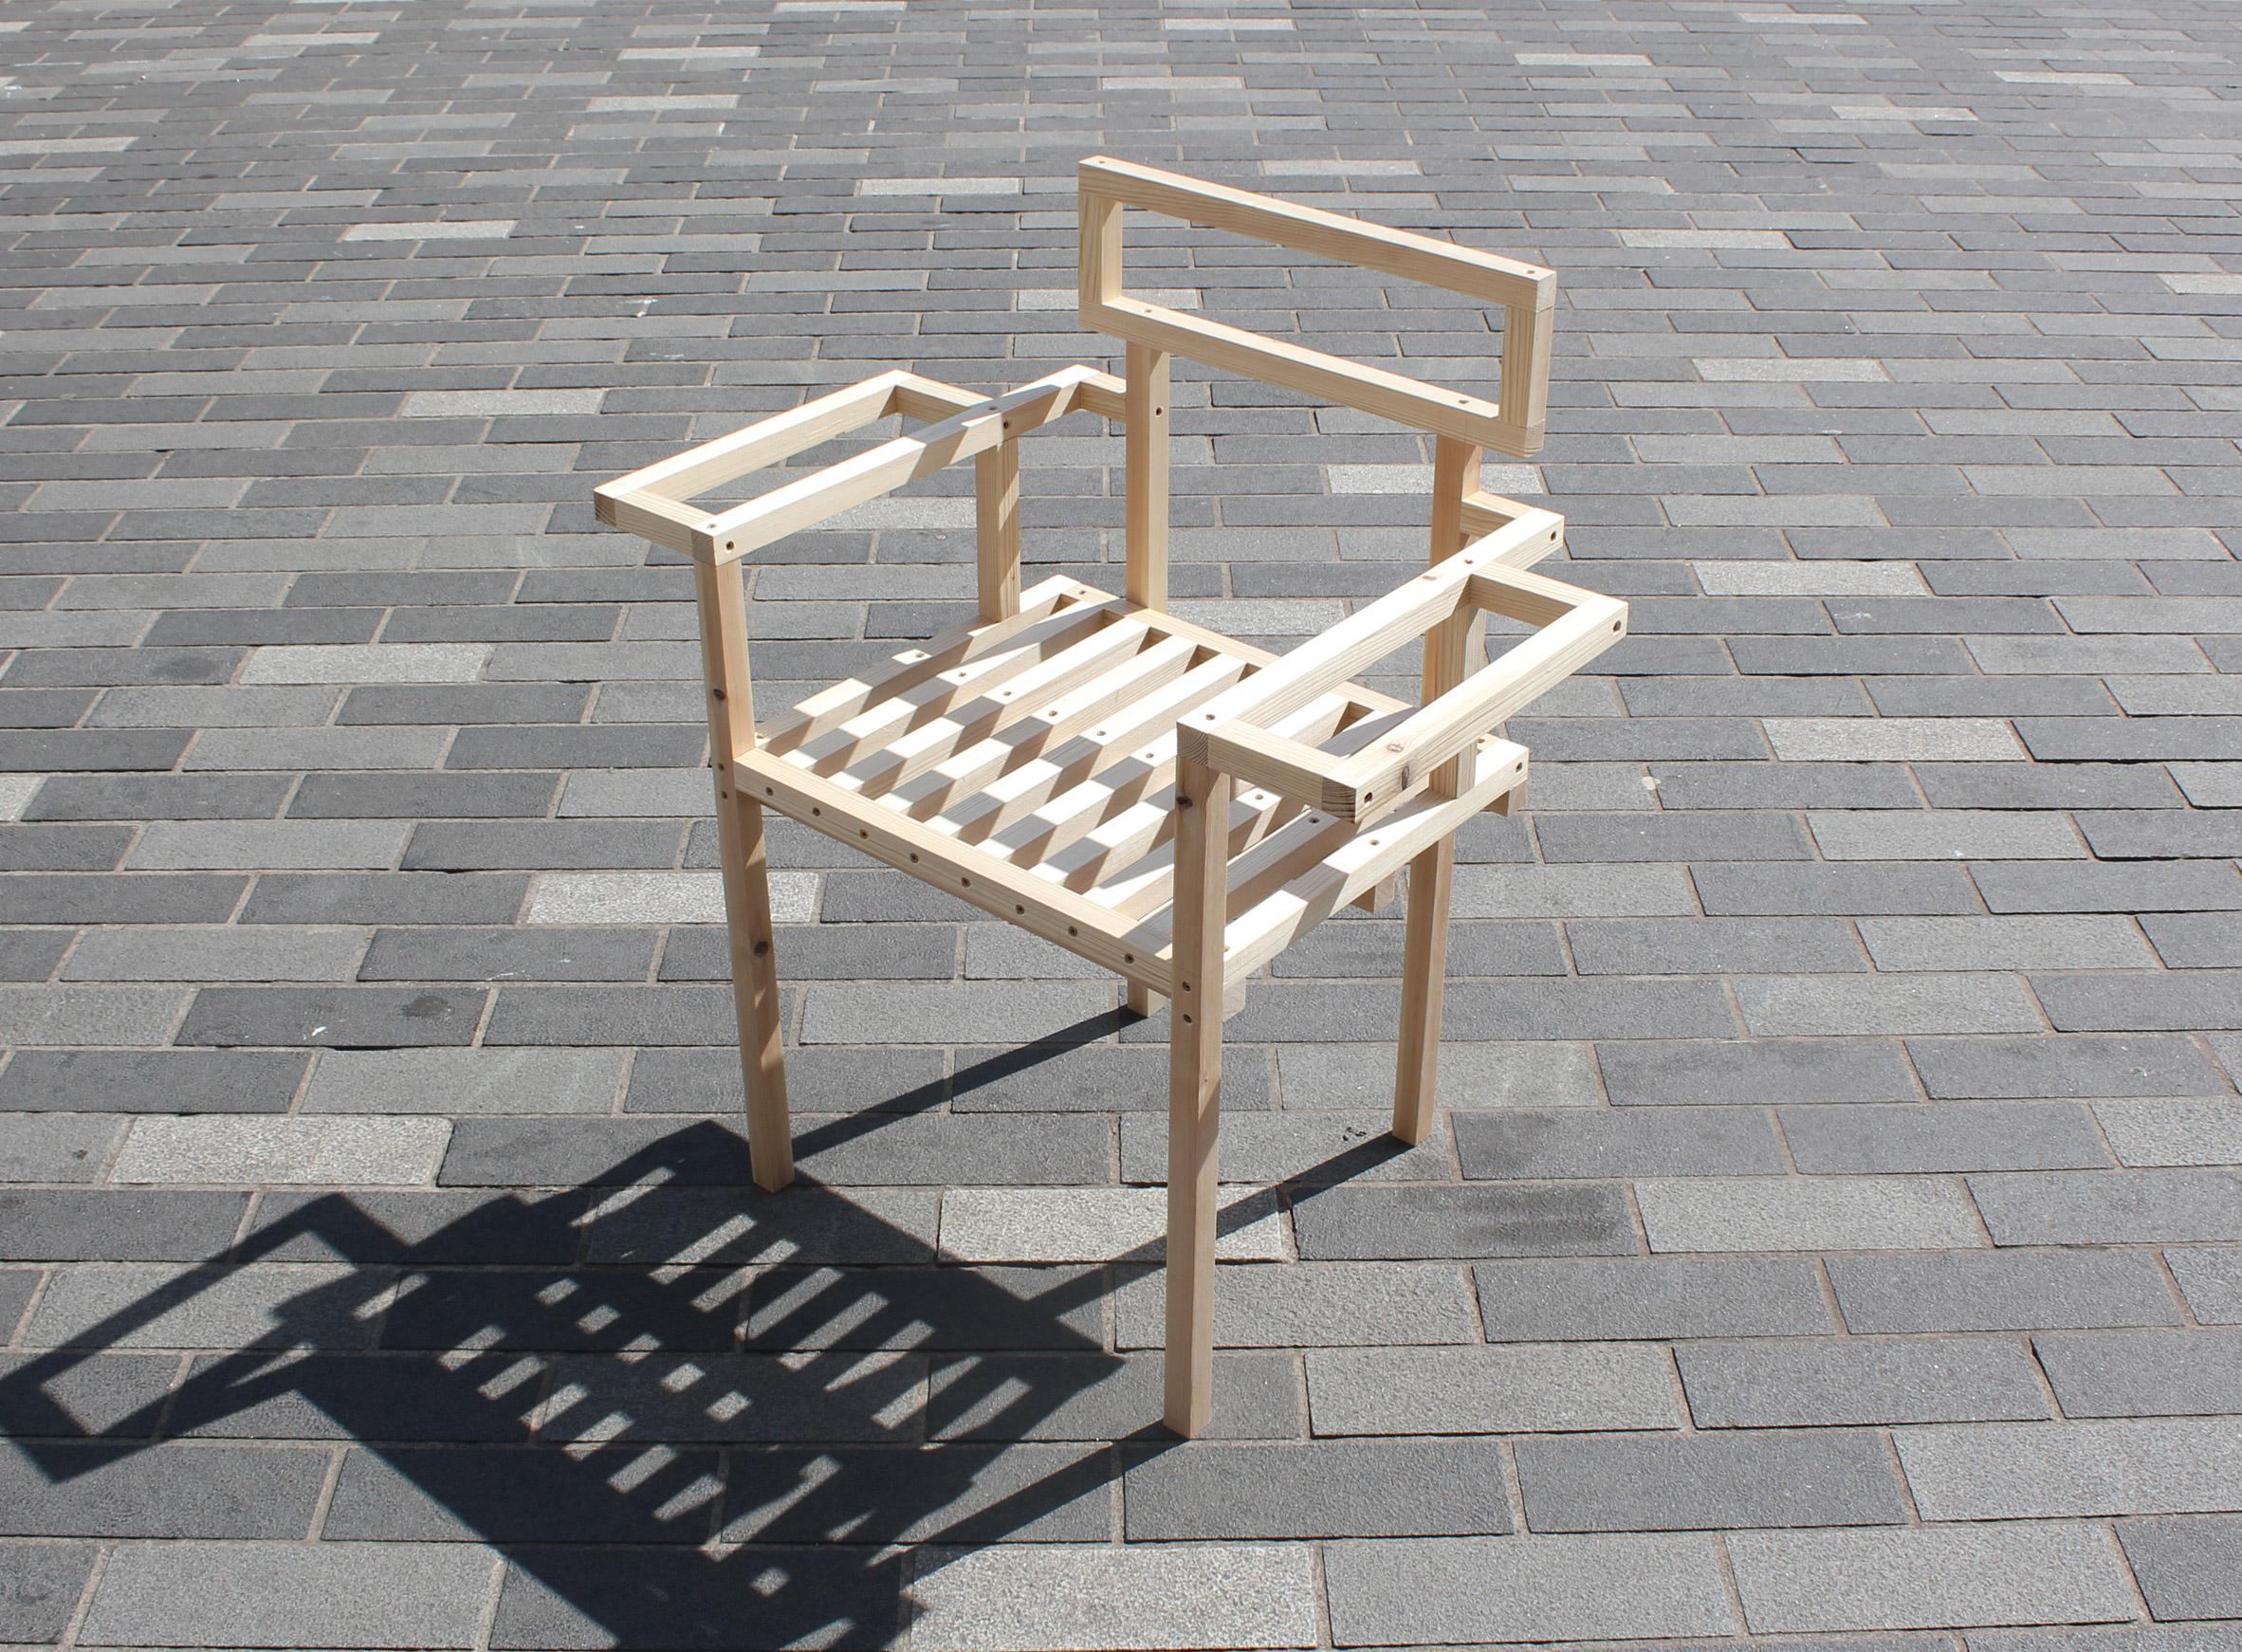 Tom and Will Butterfield invite designers to reimagine 19 bare timber chairs